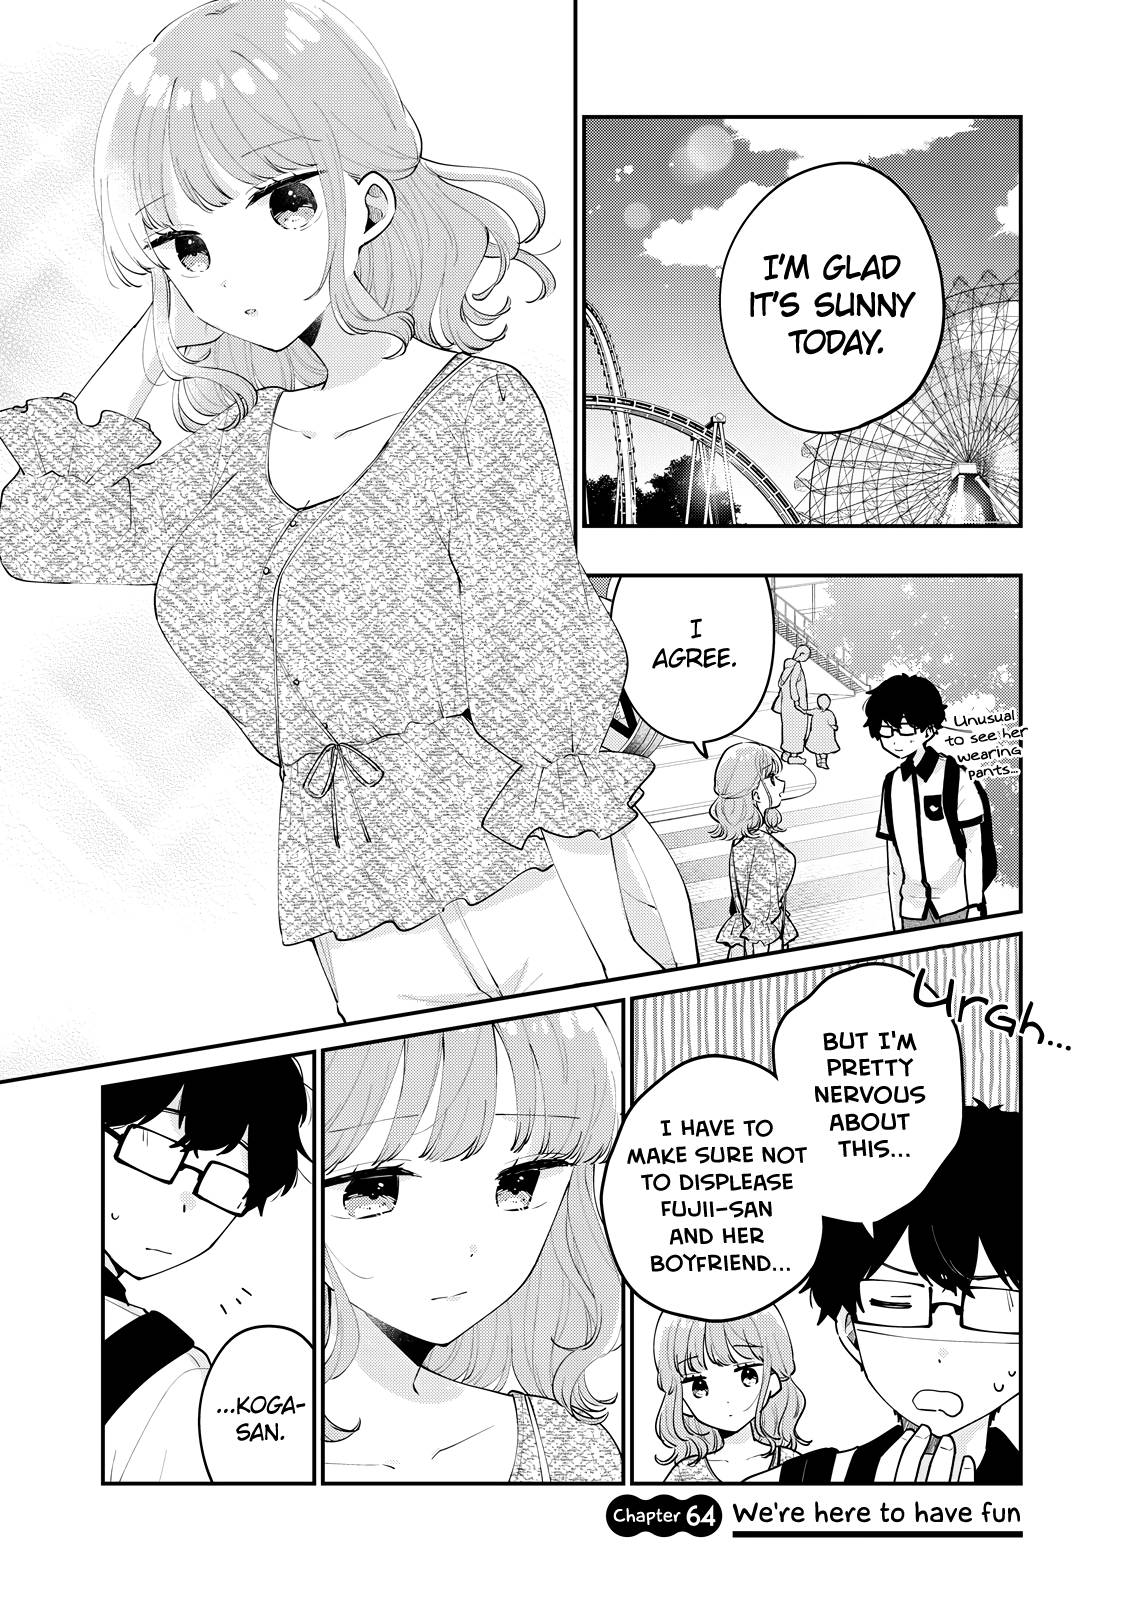 It's Not Meguro-san's First Time chapter 64 page 2